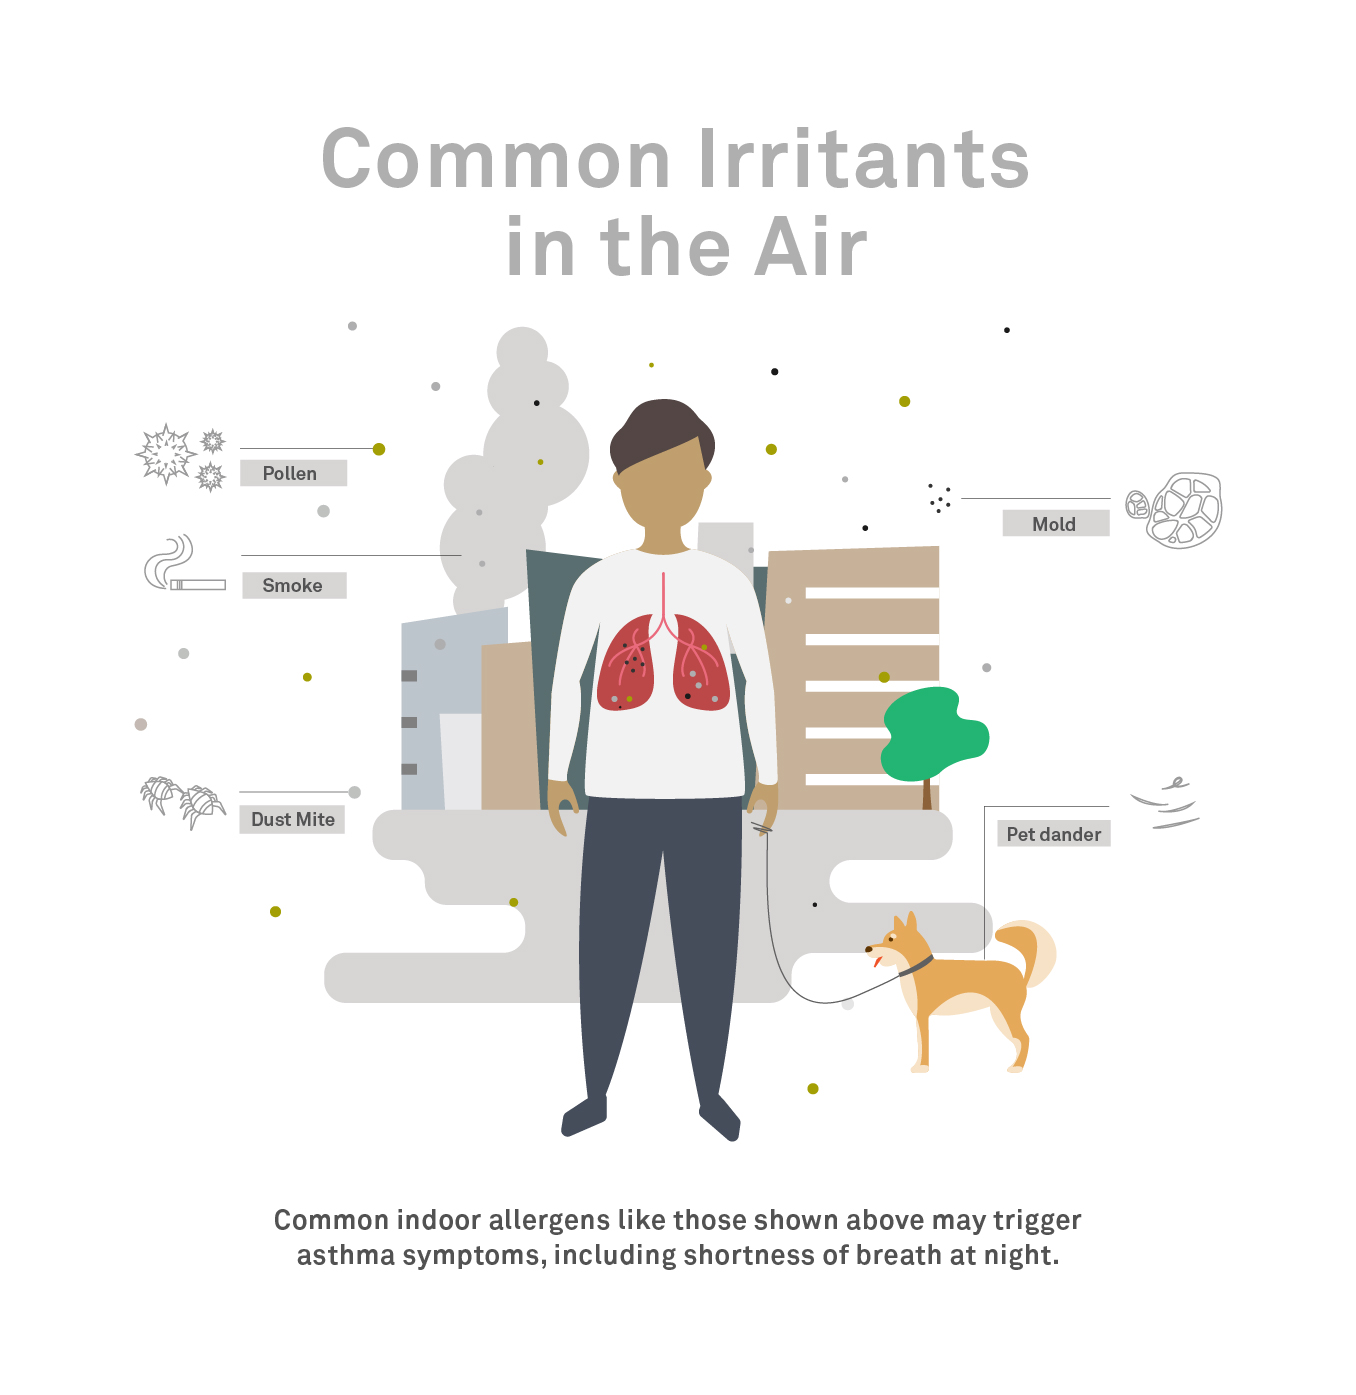 Common Airborne Irritants that Can Cause Shortness of Breath at Night